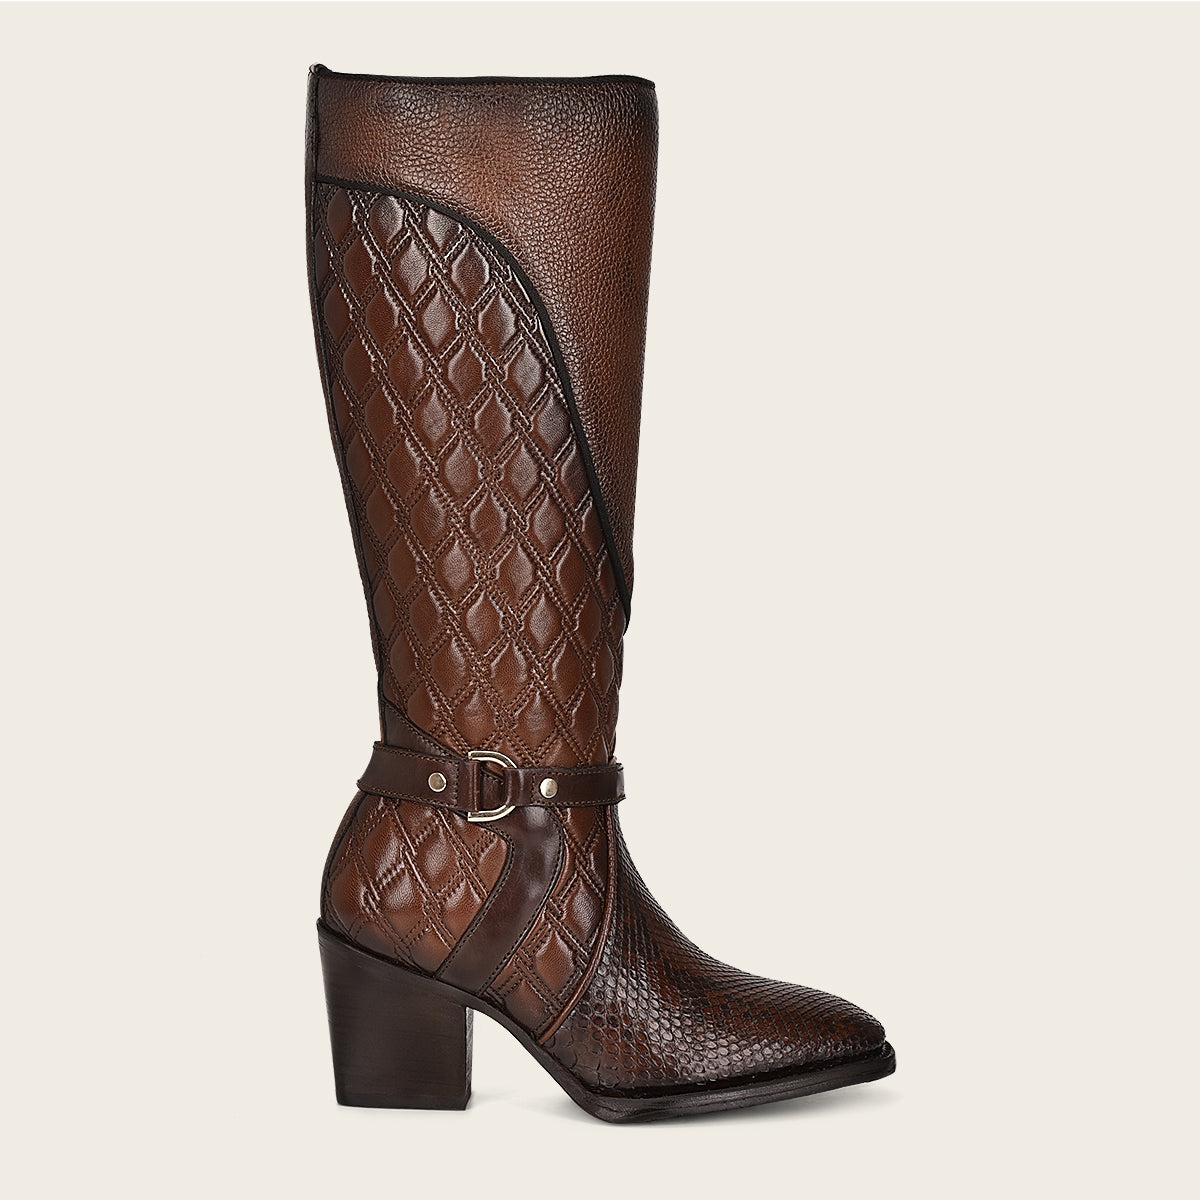 Genuine python brown leather with grid detail tall boot